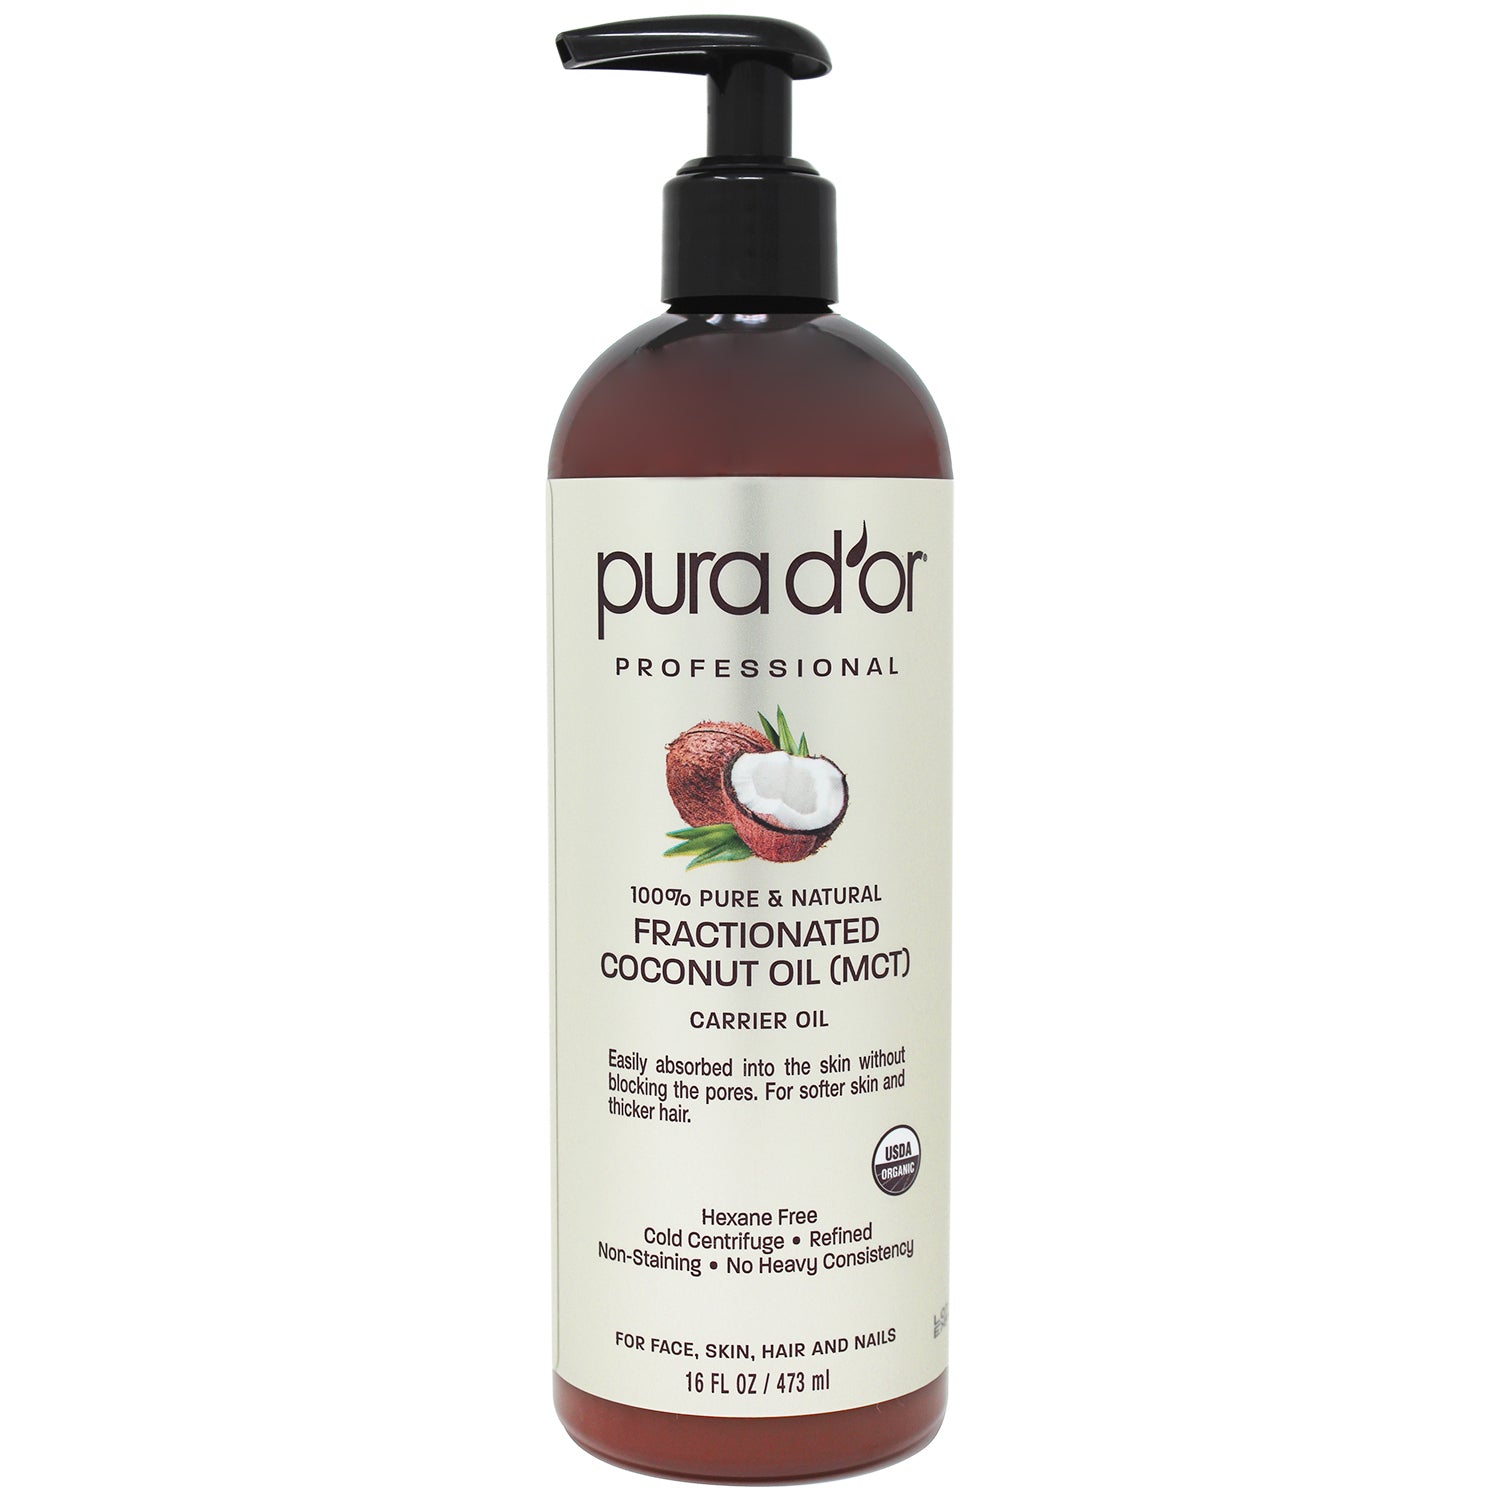 Pura D’or Professional Organic Fractionated Coconut Oil